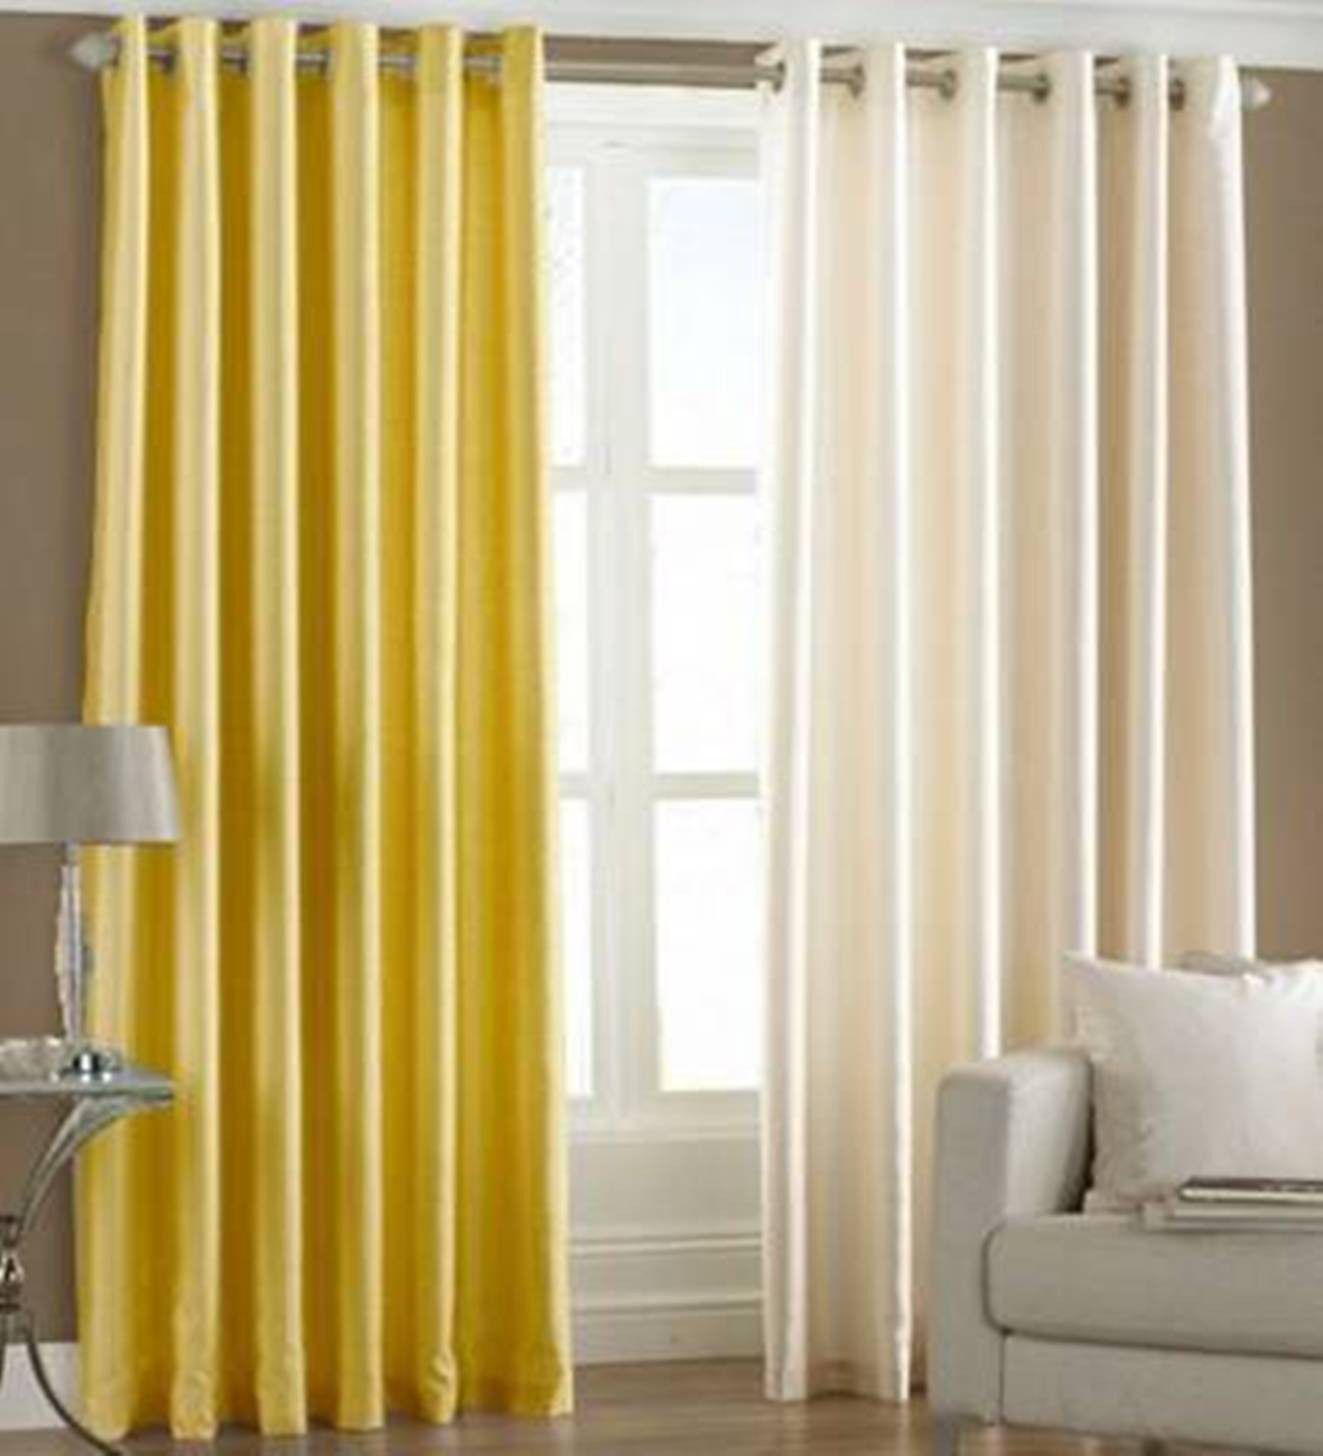     			N2C Home Solid Semi-Transparent Eyelet Curtain 5 ft ( Pack of 2 ) - Yellow